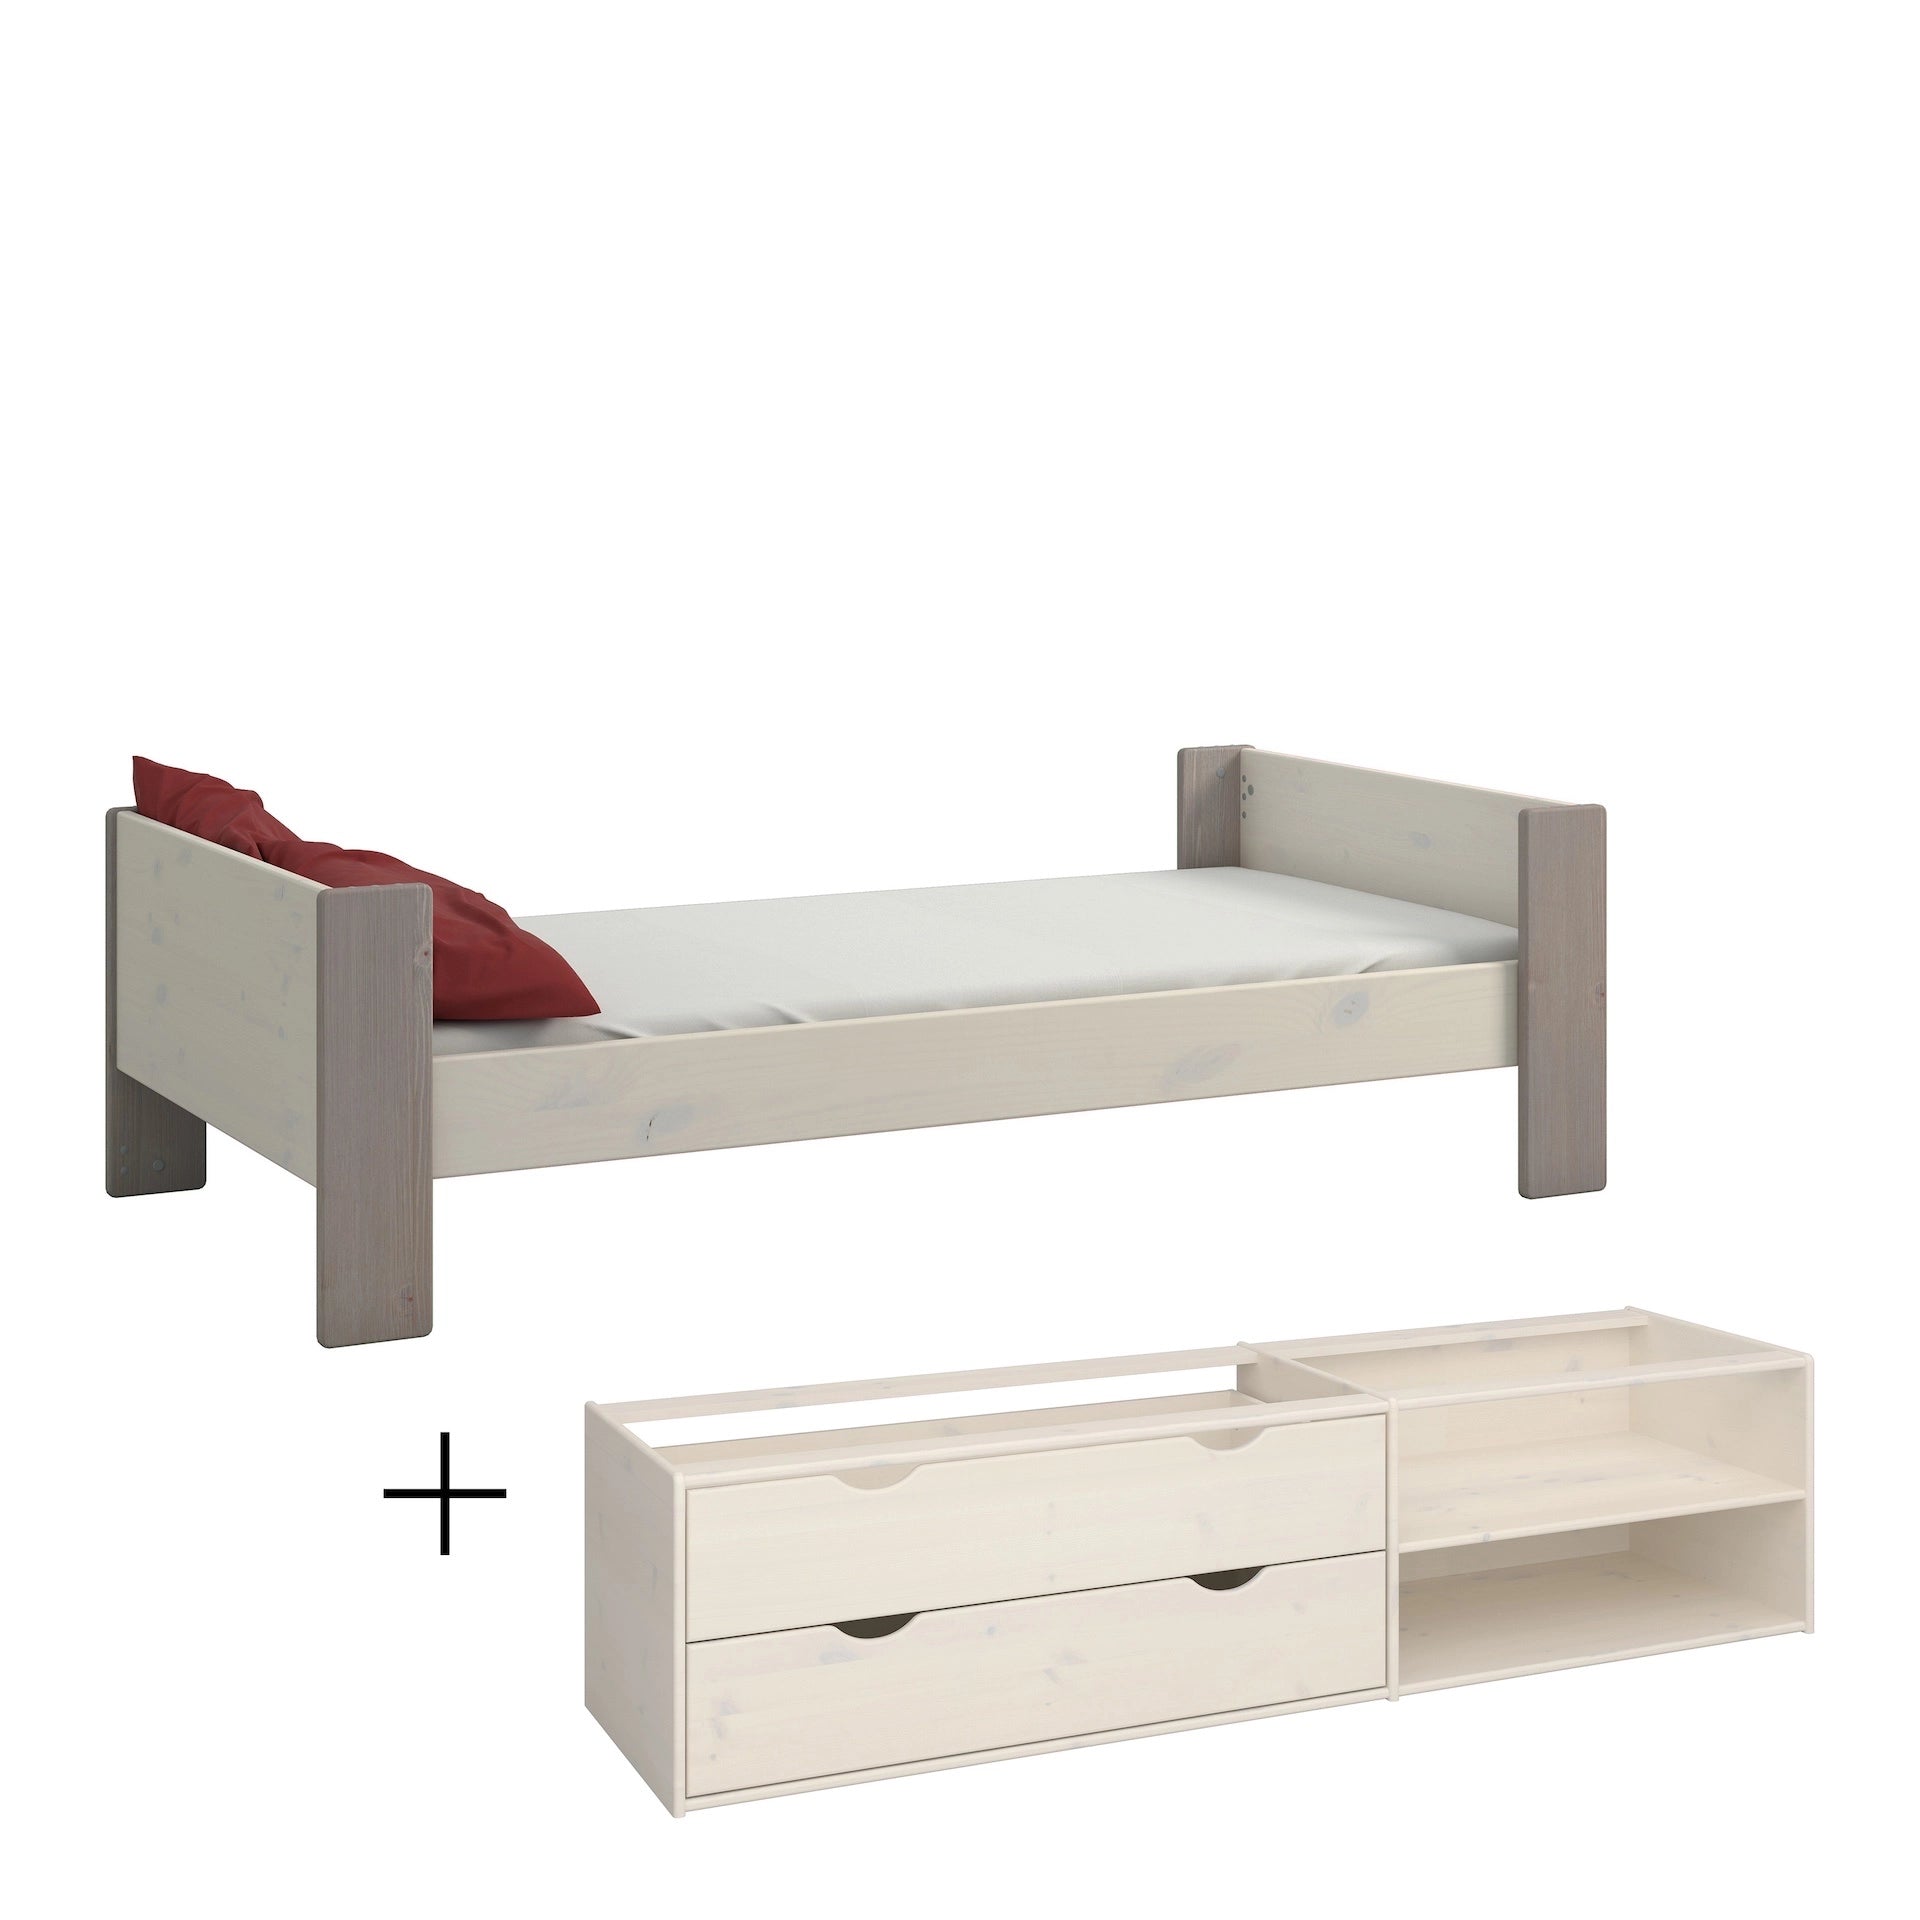 Furniture To Go Steens For Kids 3ft Single Bed, Includes - Under Bed Drawer Section 2 Drawers in Whitewash Grey Brown Lacquered